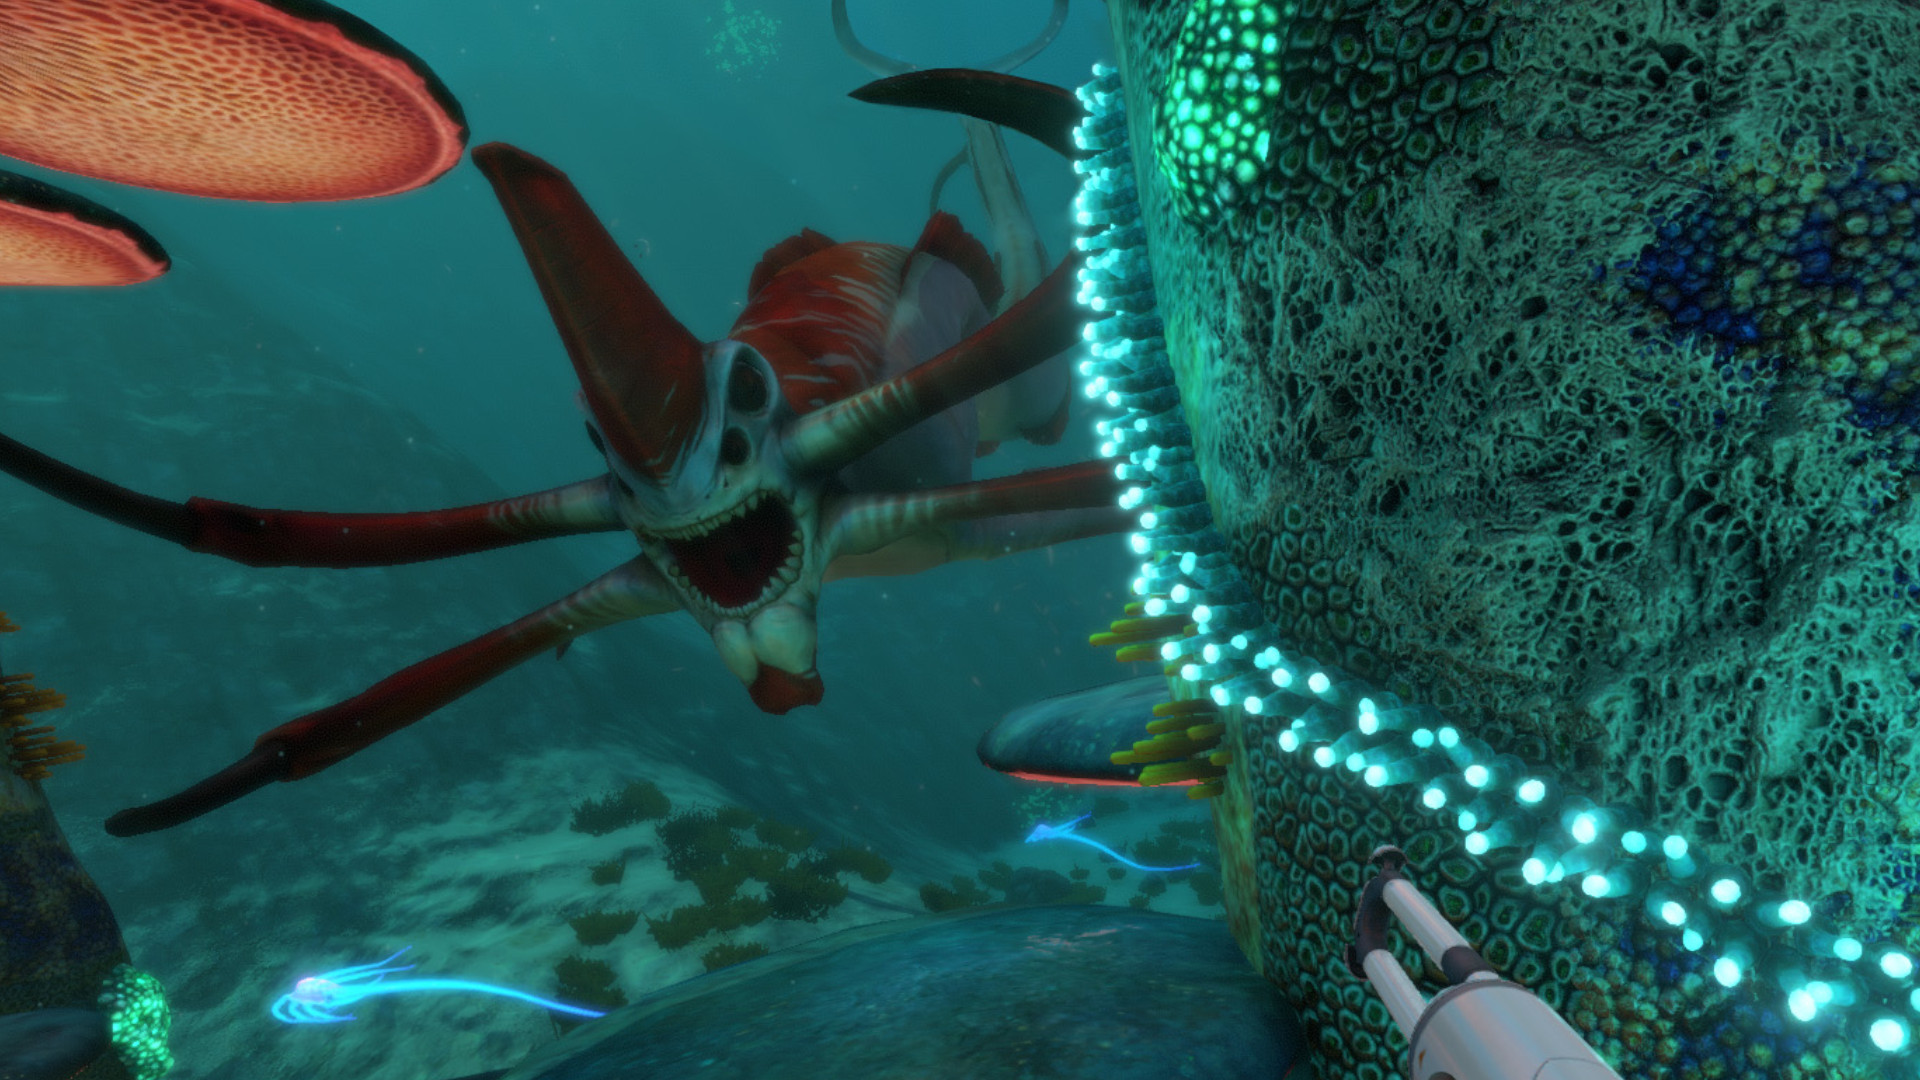 The Next Game From The Subnautica Devs Isnt Subnautica But It Does